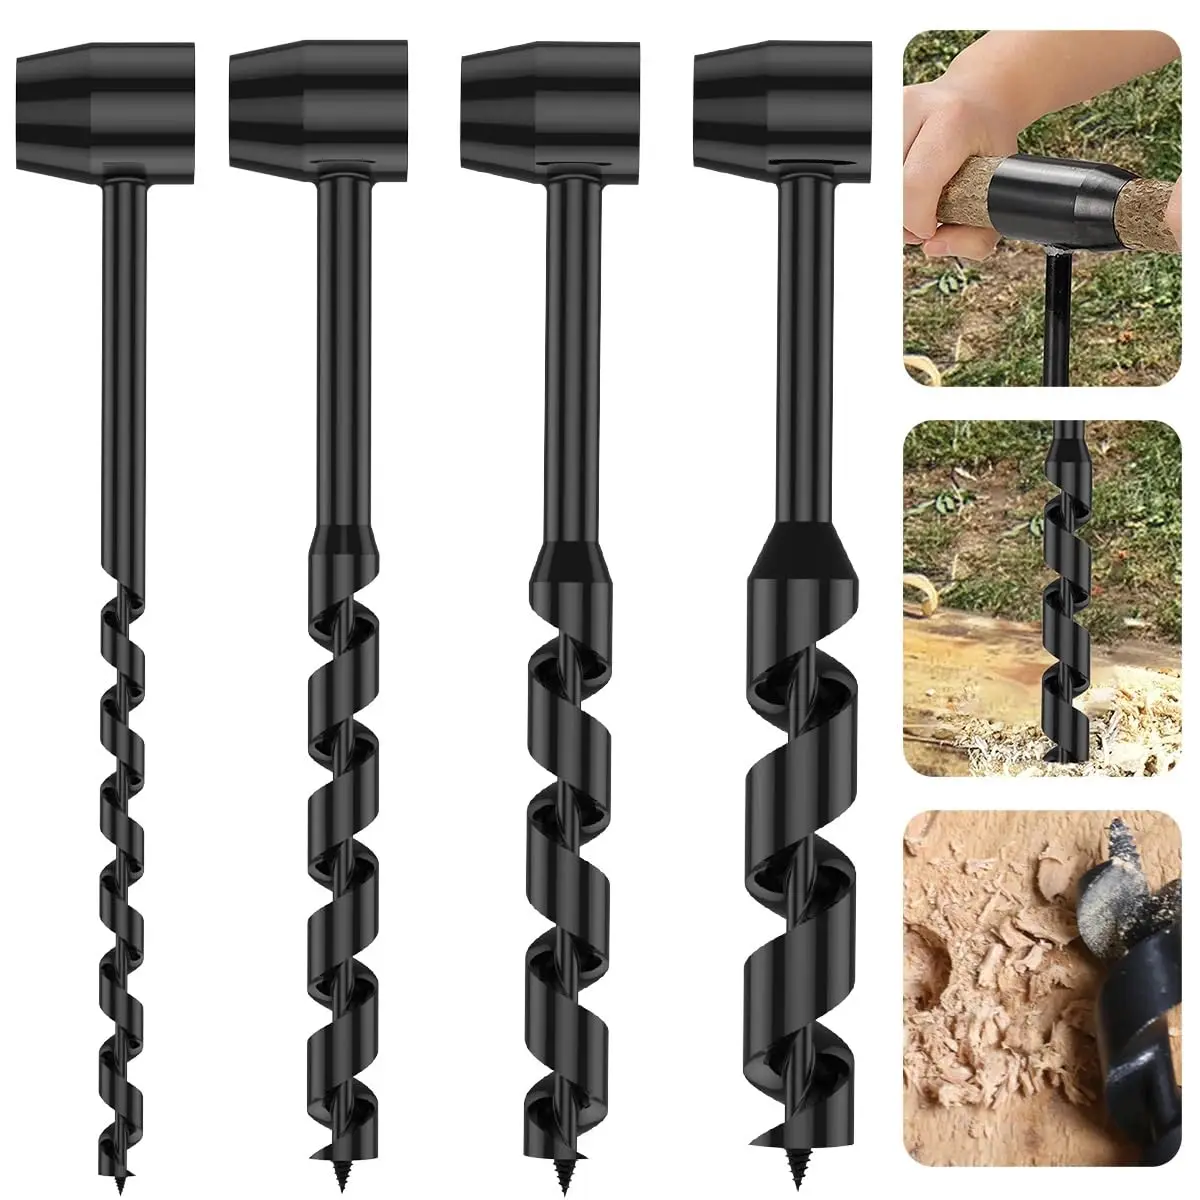 

Bushcraft Outdoor Survival Hand Drill Set Carbon Steel Manual Auger Self-Tapping Wood Punching Tool for Camping,Hiking,Woodwork